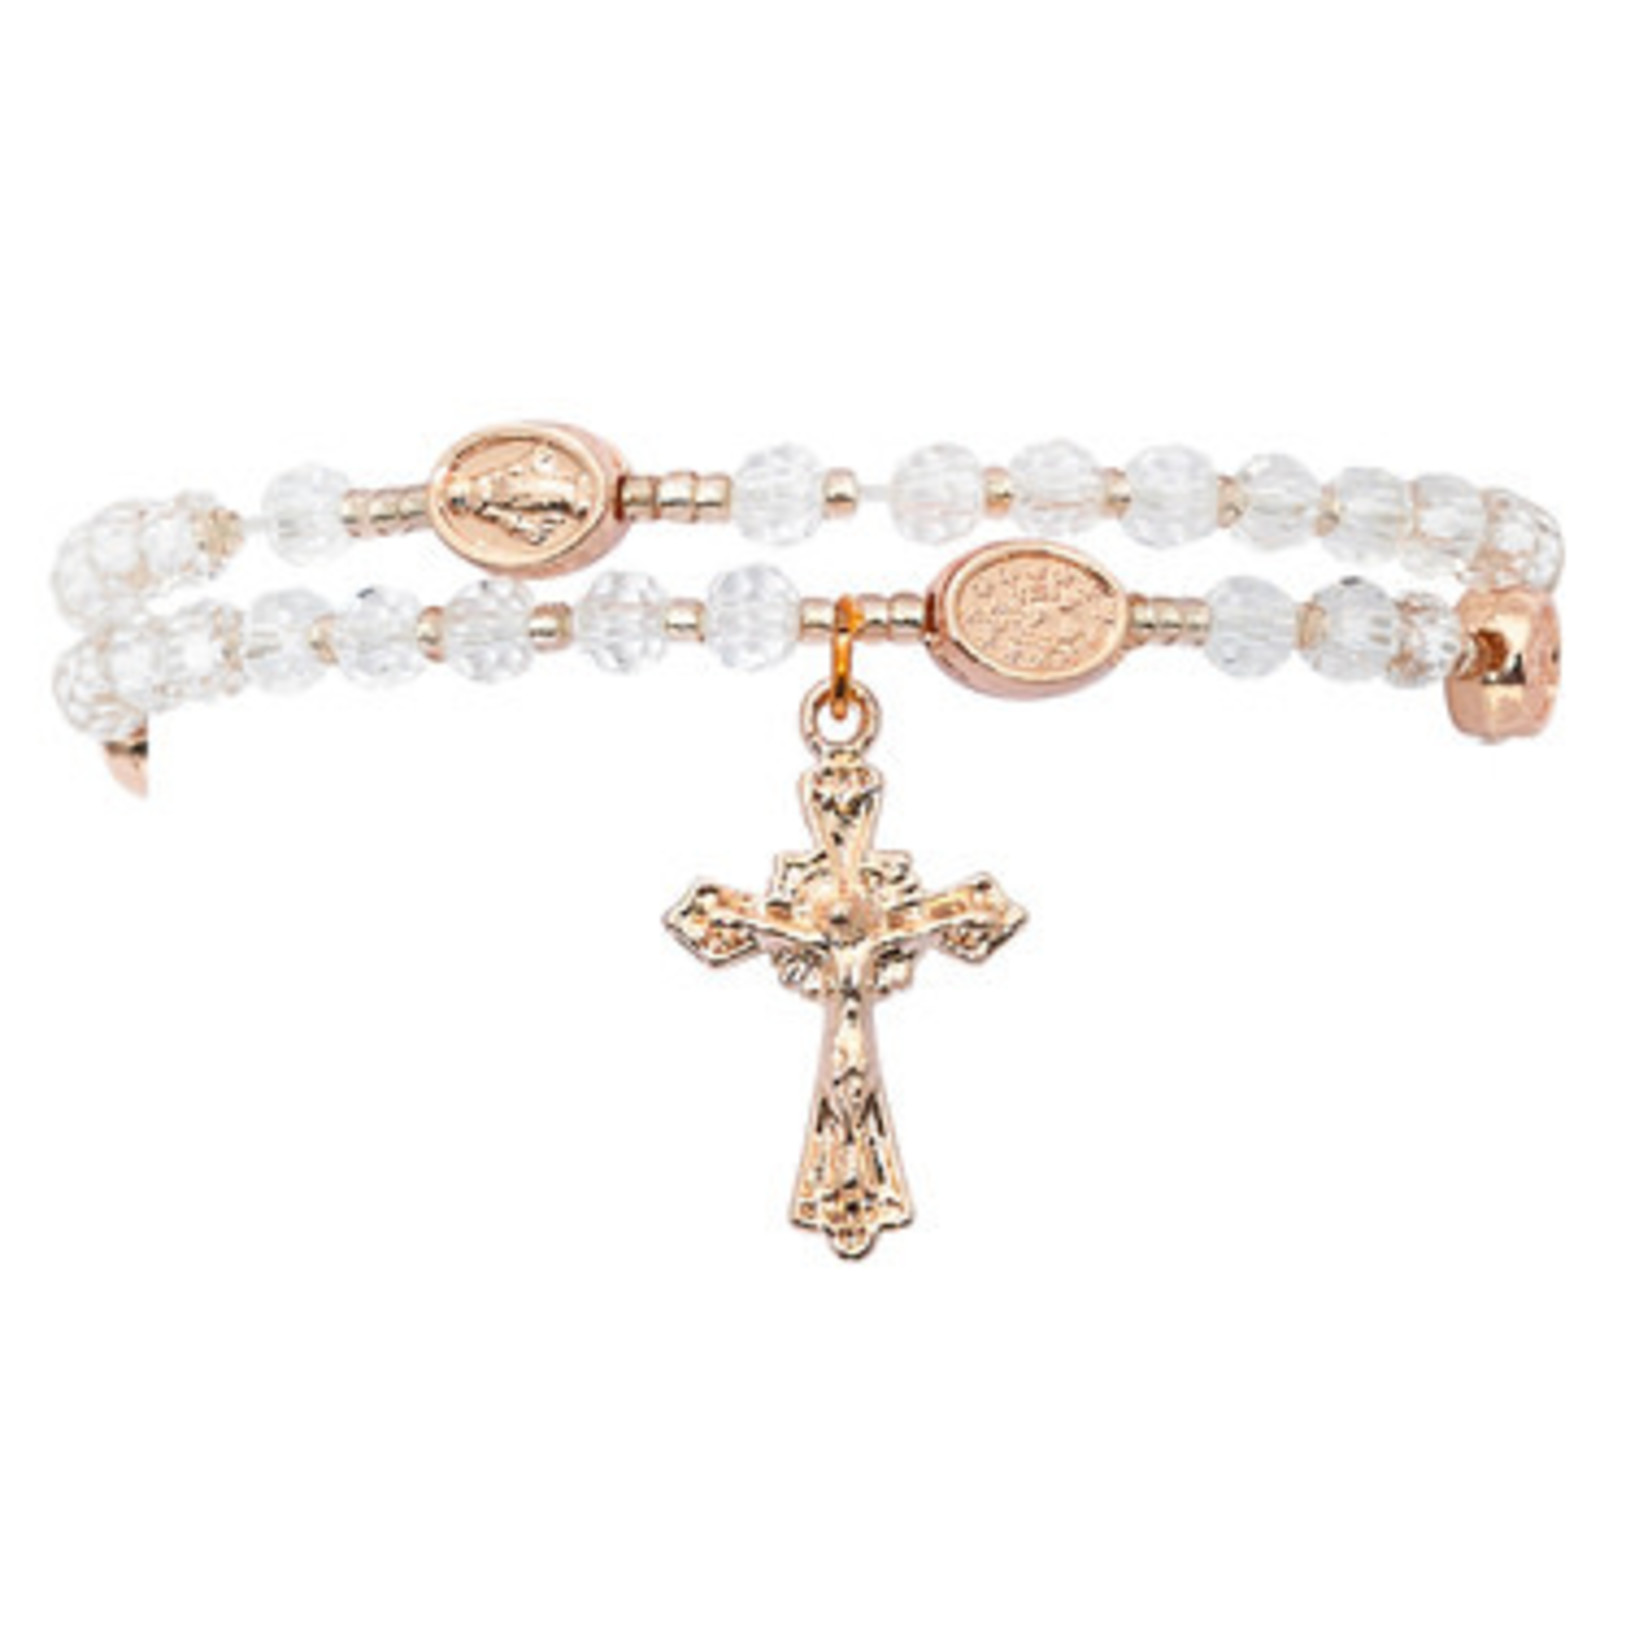 Crystal and Copper Twistable Rosary Bracelet